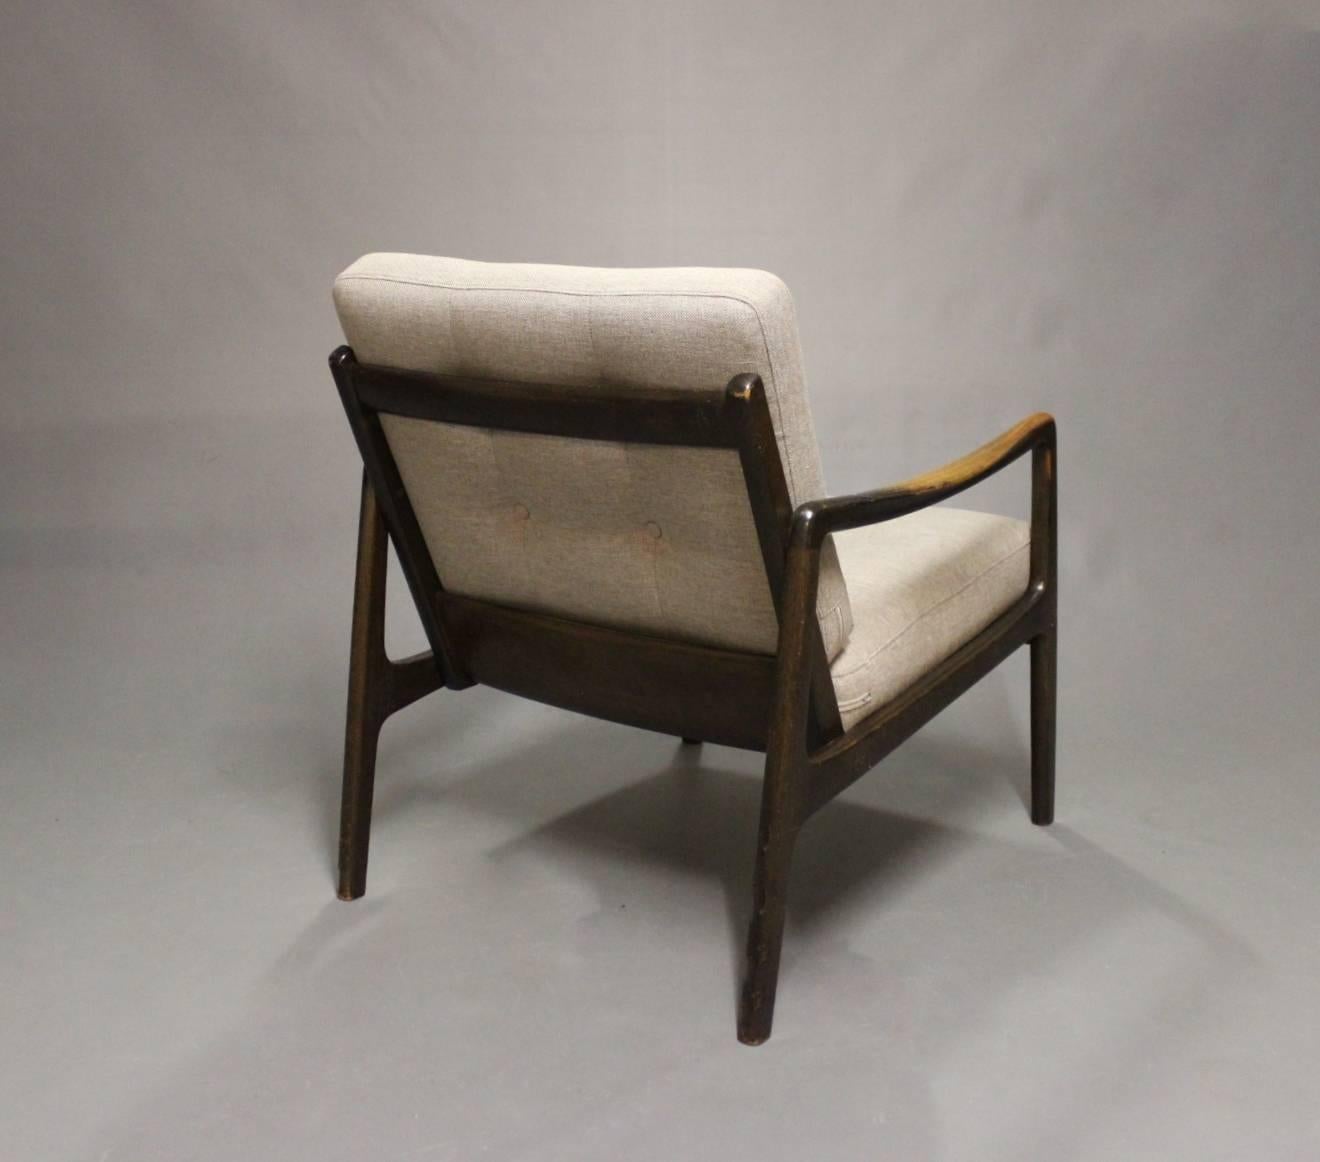 Scandinavian Modern Easy Chair in Teak and Grey Wool Seats of Danish Design from the 1960s For Sale